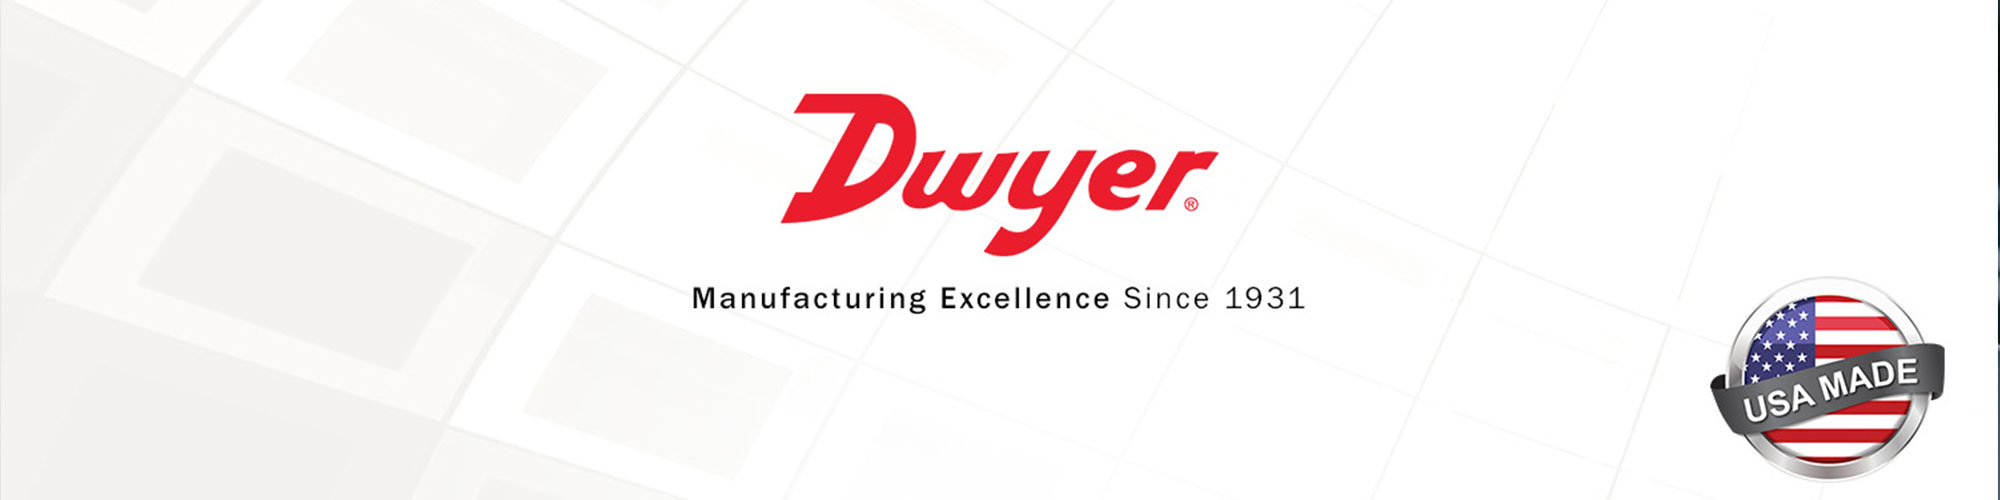 Dwyer Instruments Distributor | Electric Supply & Equipment